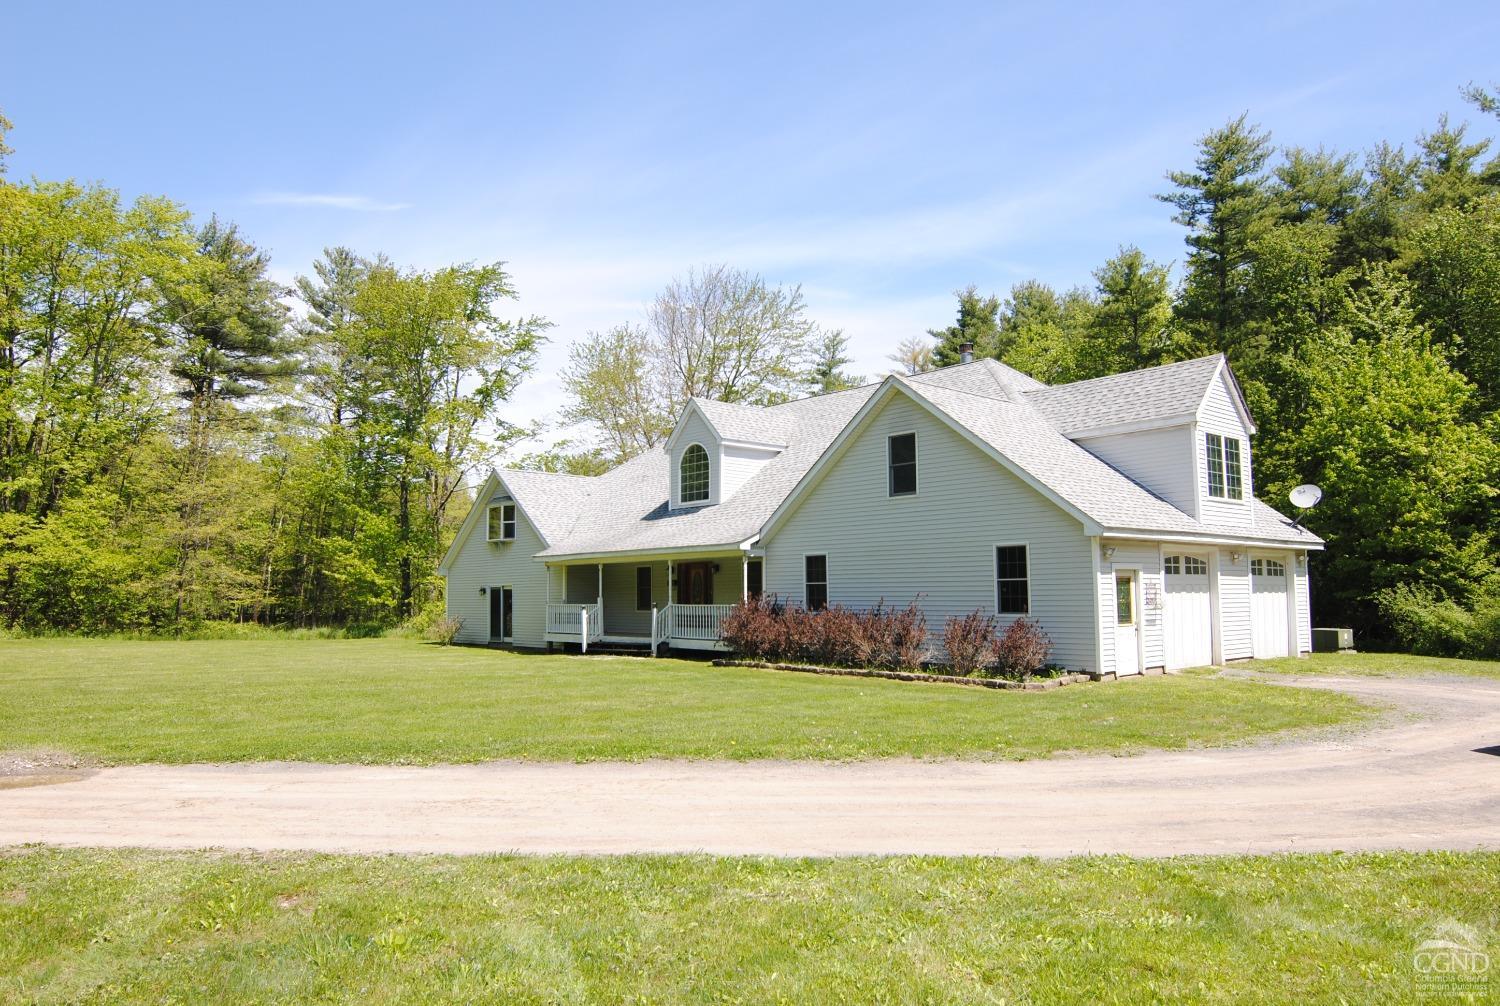 92 Stony Brook Road, Palenville, New York - 5 Bedrooms  
3 Bathrooms  
10 Rooms - 